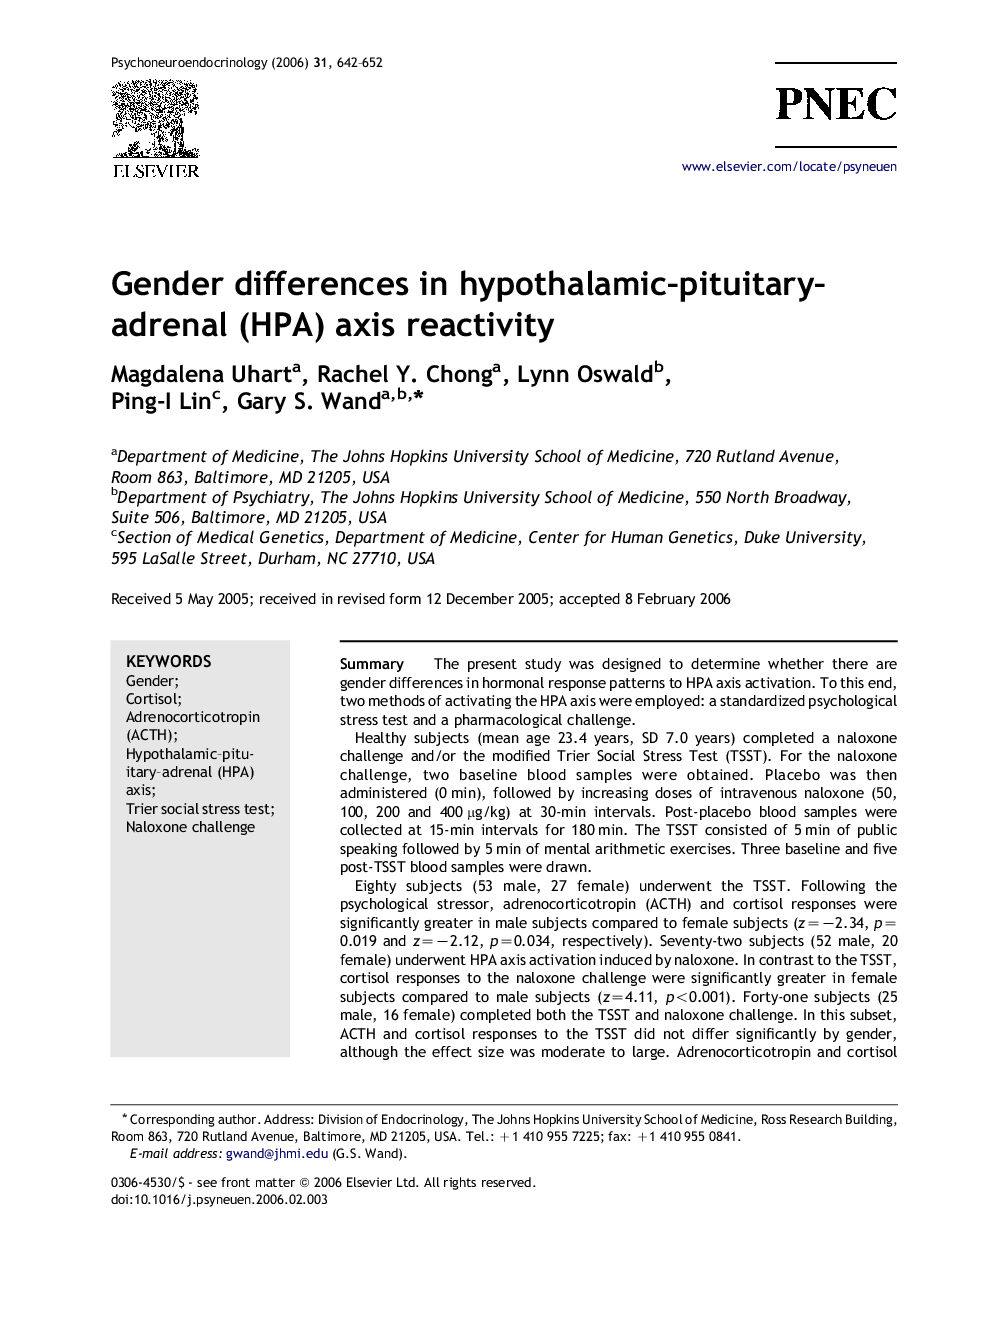 Gender differences in hypothalamic–pituitary–adrenal (HPA) axis reactivity